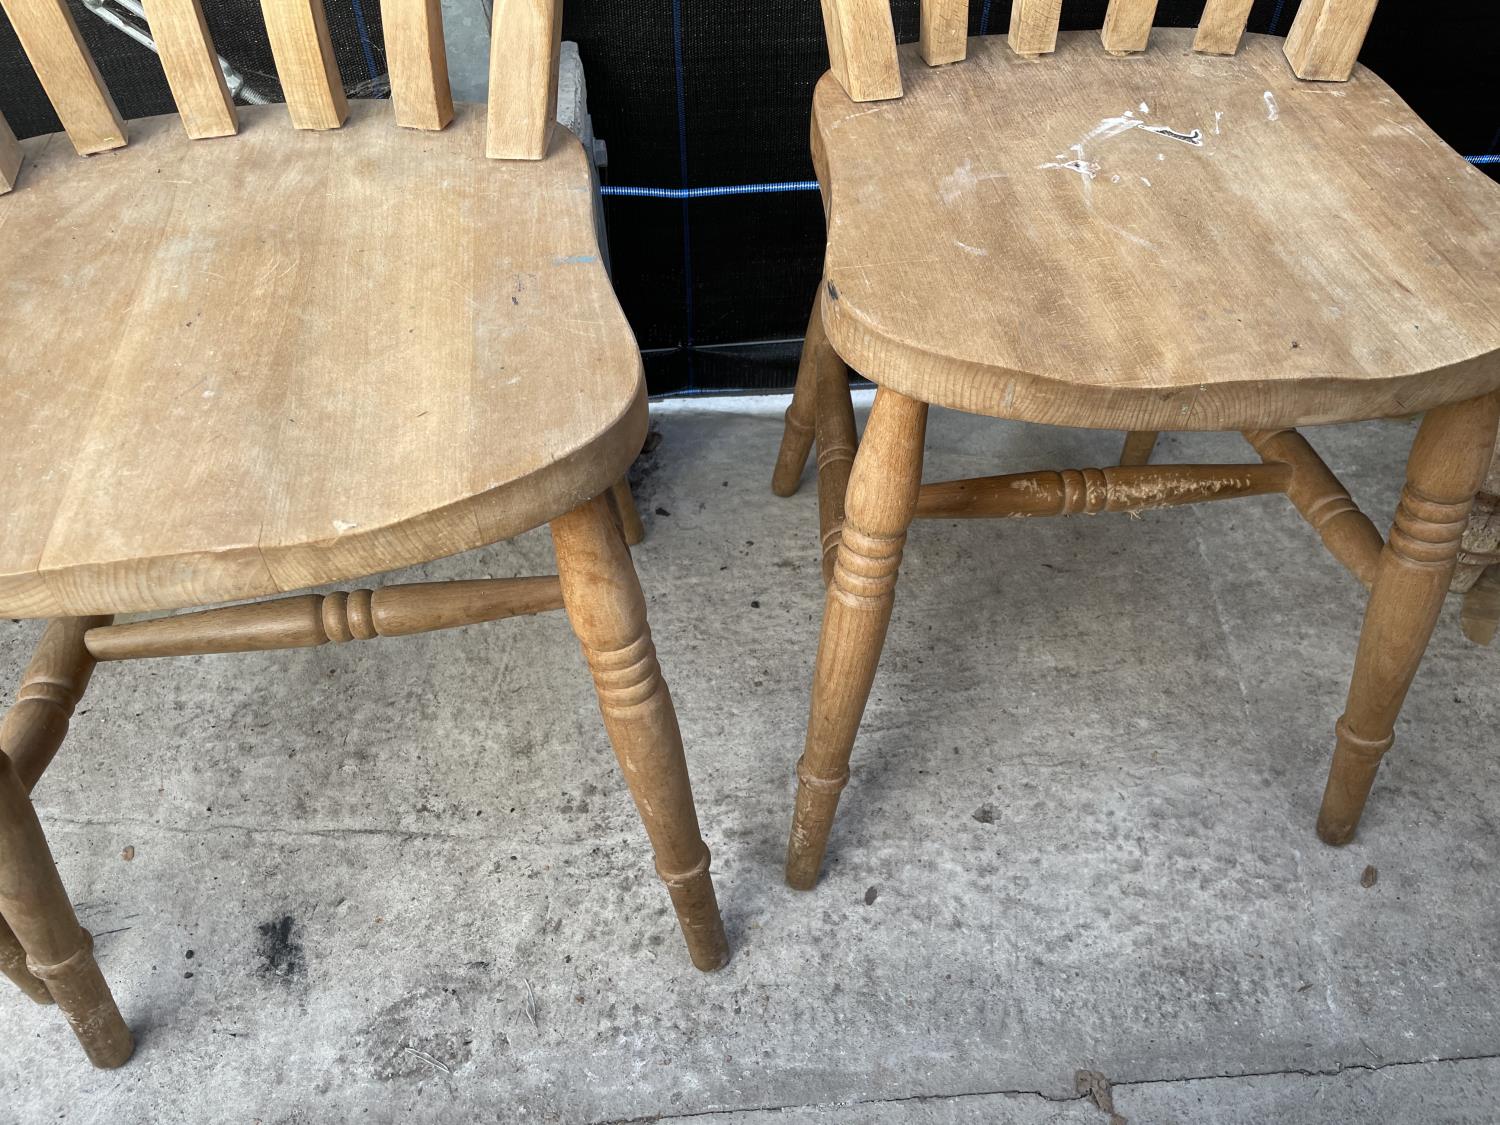 THREE VICTORIAN STYLE KITCHEN CHAIRS - Image 3 of 4